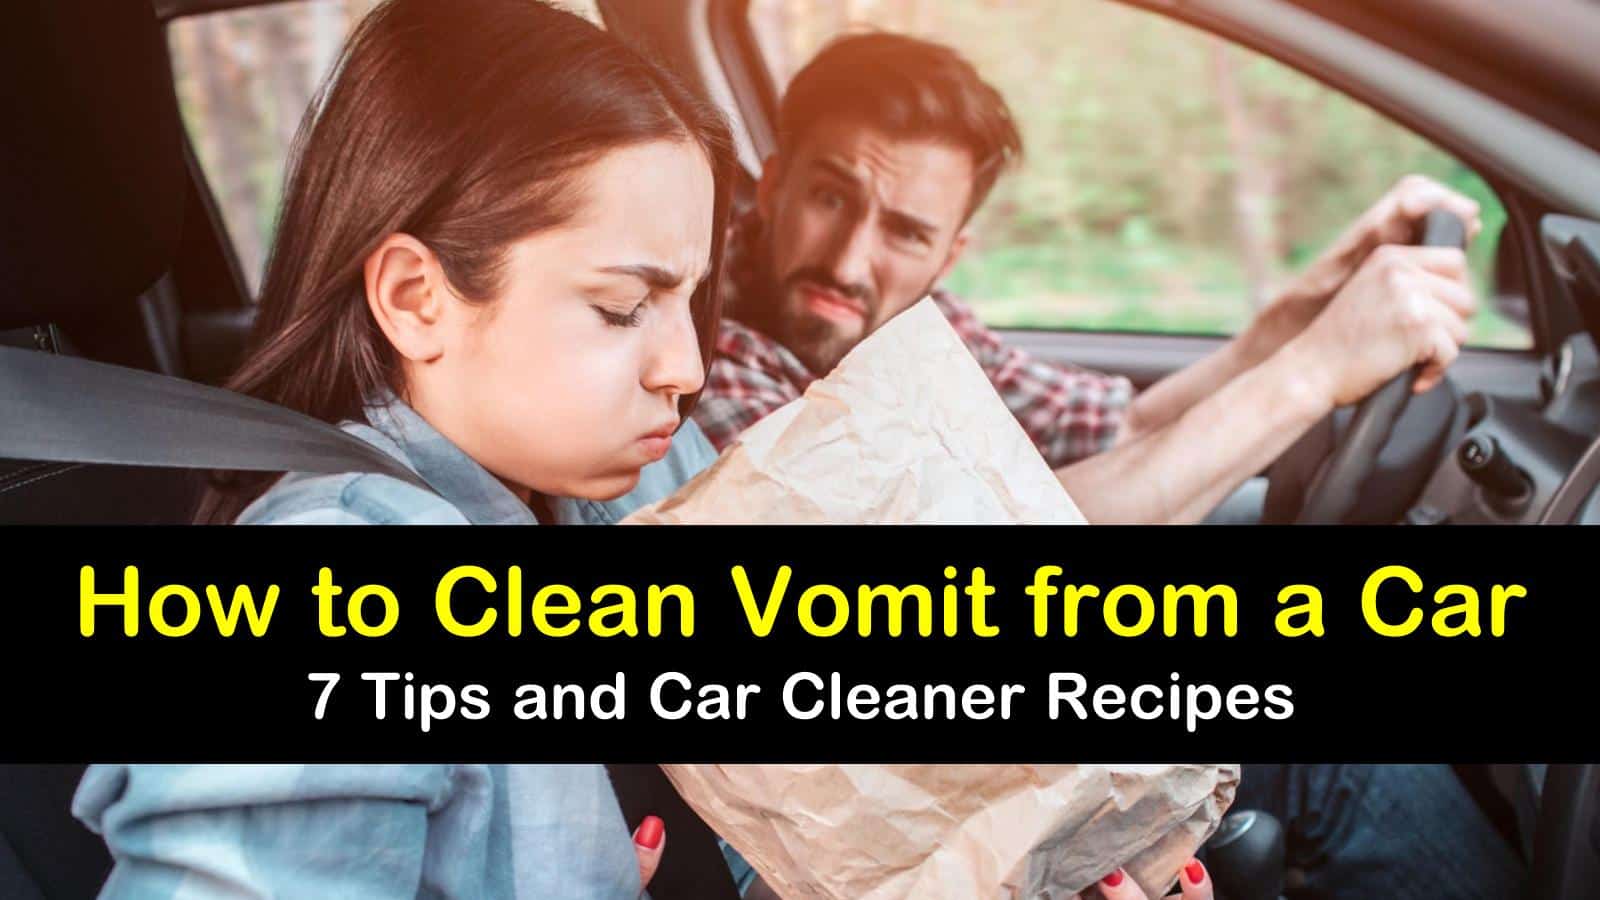 how to clean vomit from car titleimg1